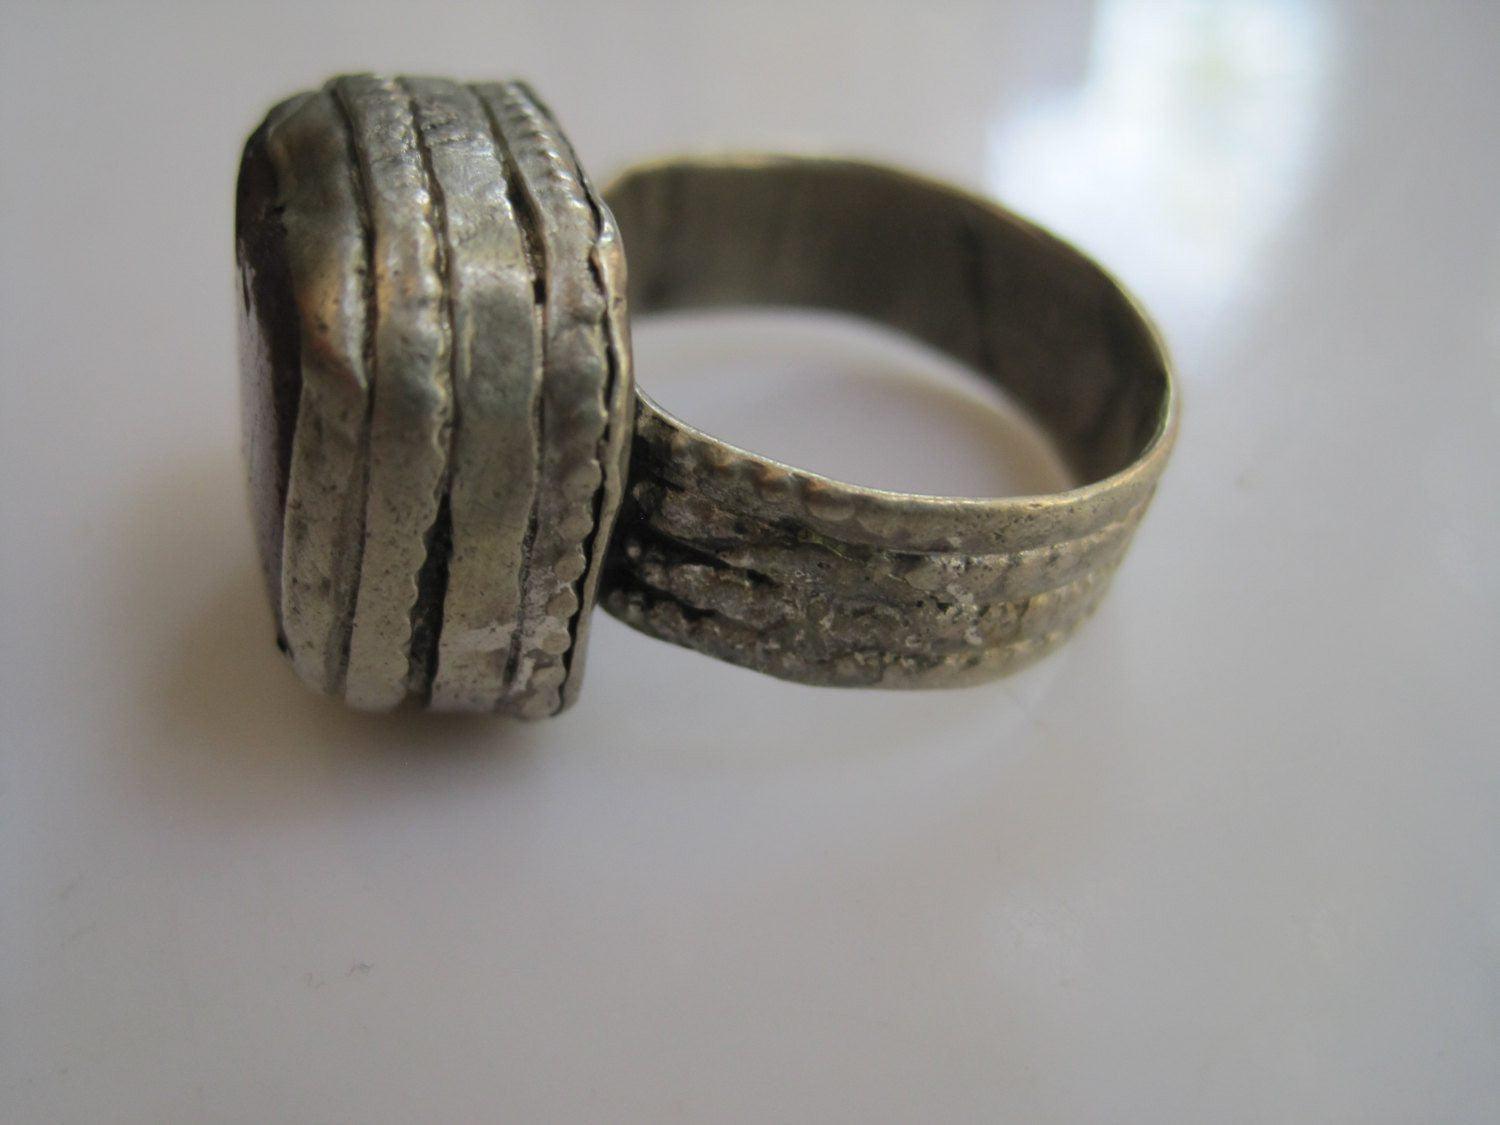 Vintage Bedouin Metal and Glass Ring - Size 8 - Anteeka